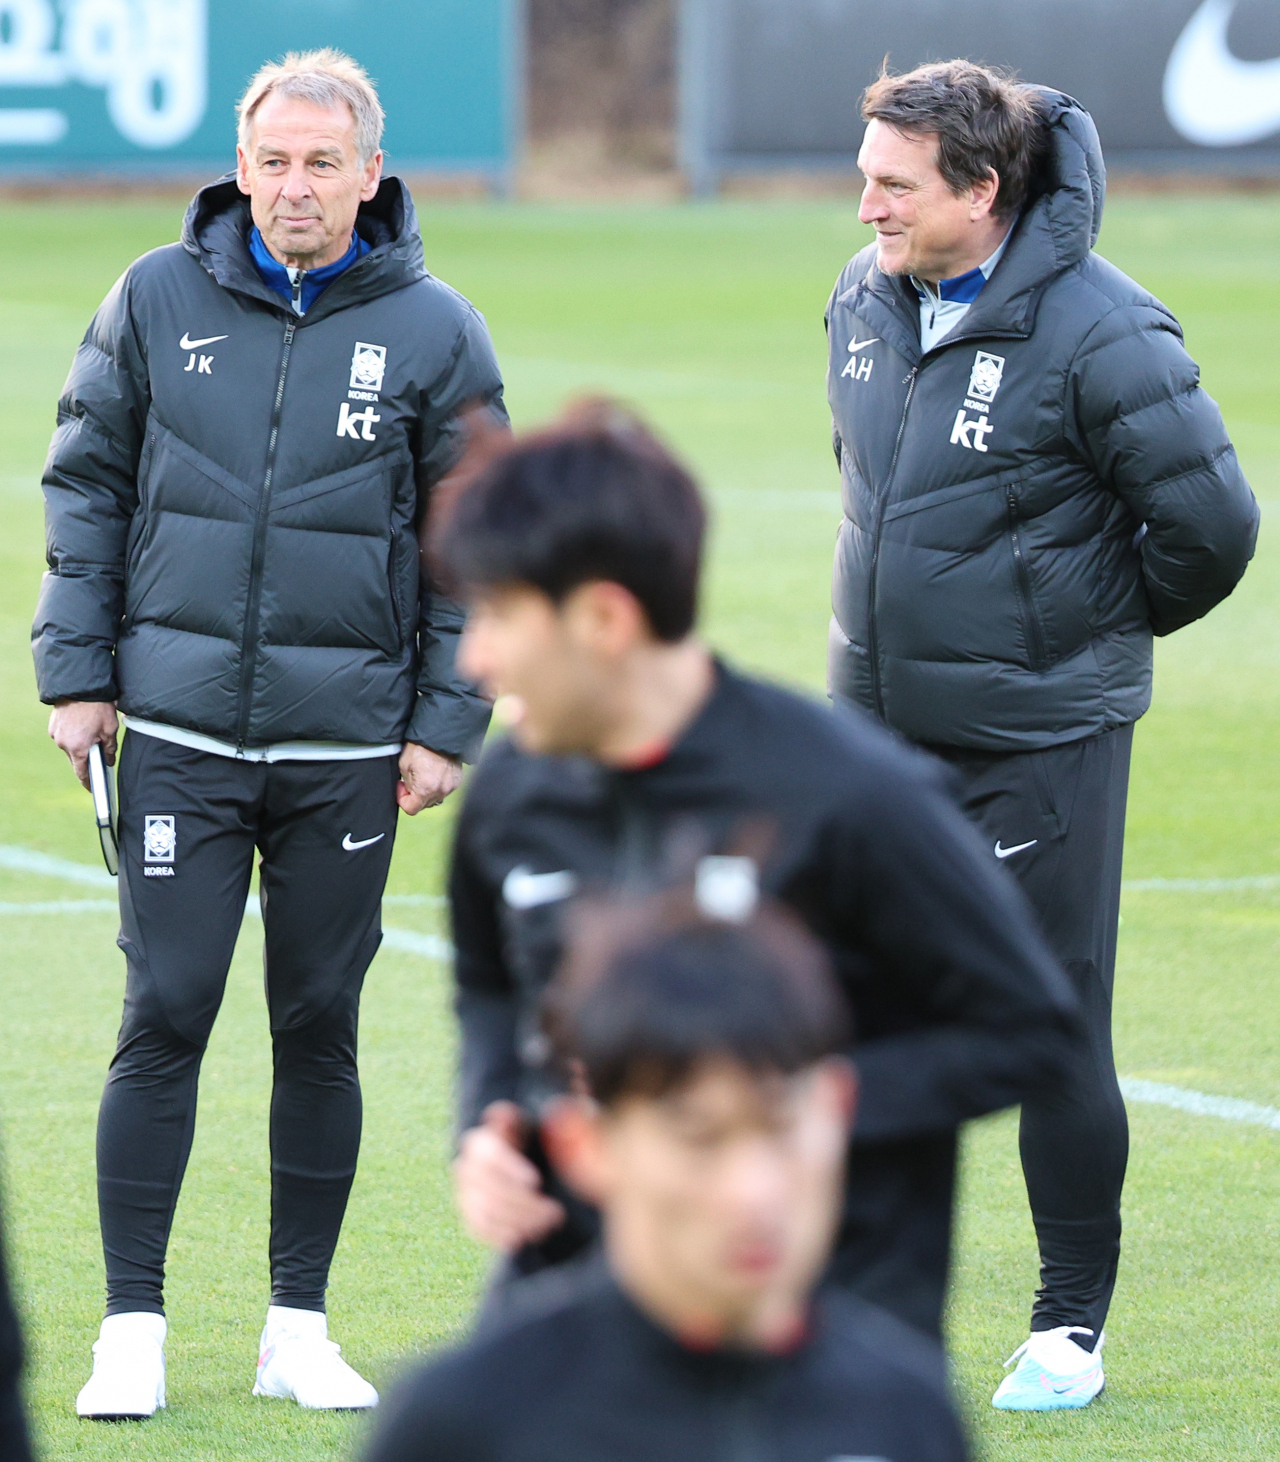 Korea national football coach, Jürgen Klinsmann and his assistant coach Andi Herzog are watching the players as they warm up before a training session at the National Football Center in Paju, some 30 kilometers northwest of Seoul, on Sunday, in preparation for a friendly match against Uruguay. (Yonhap)